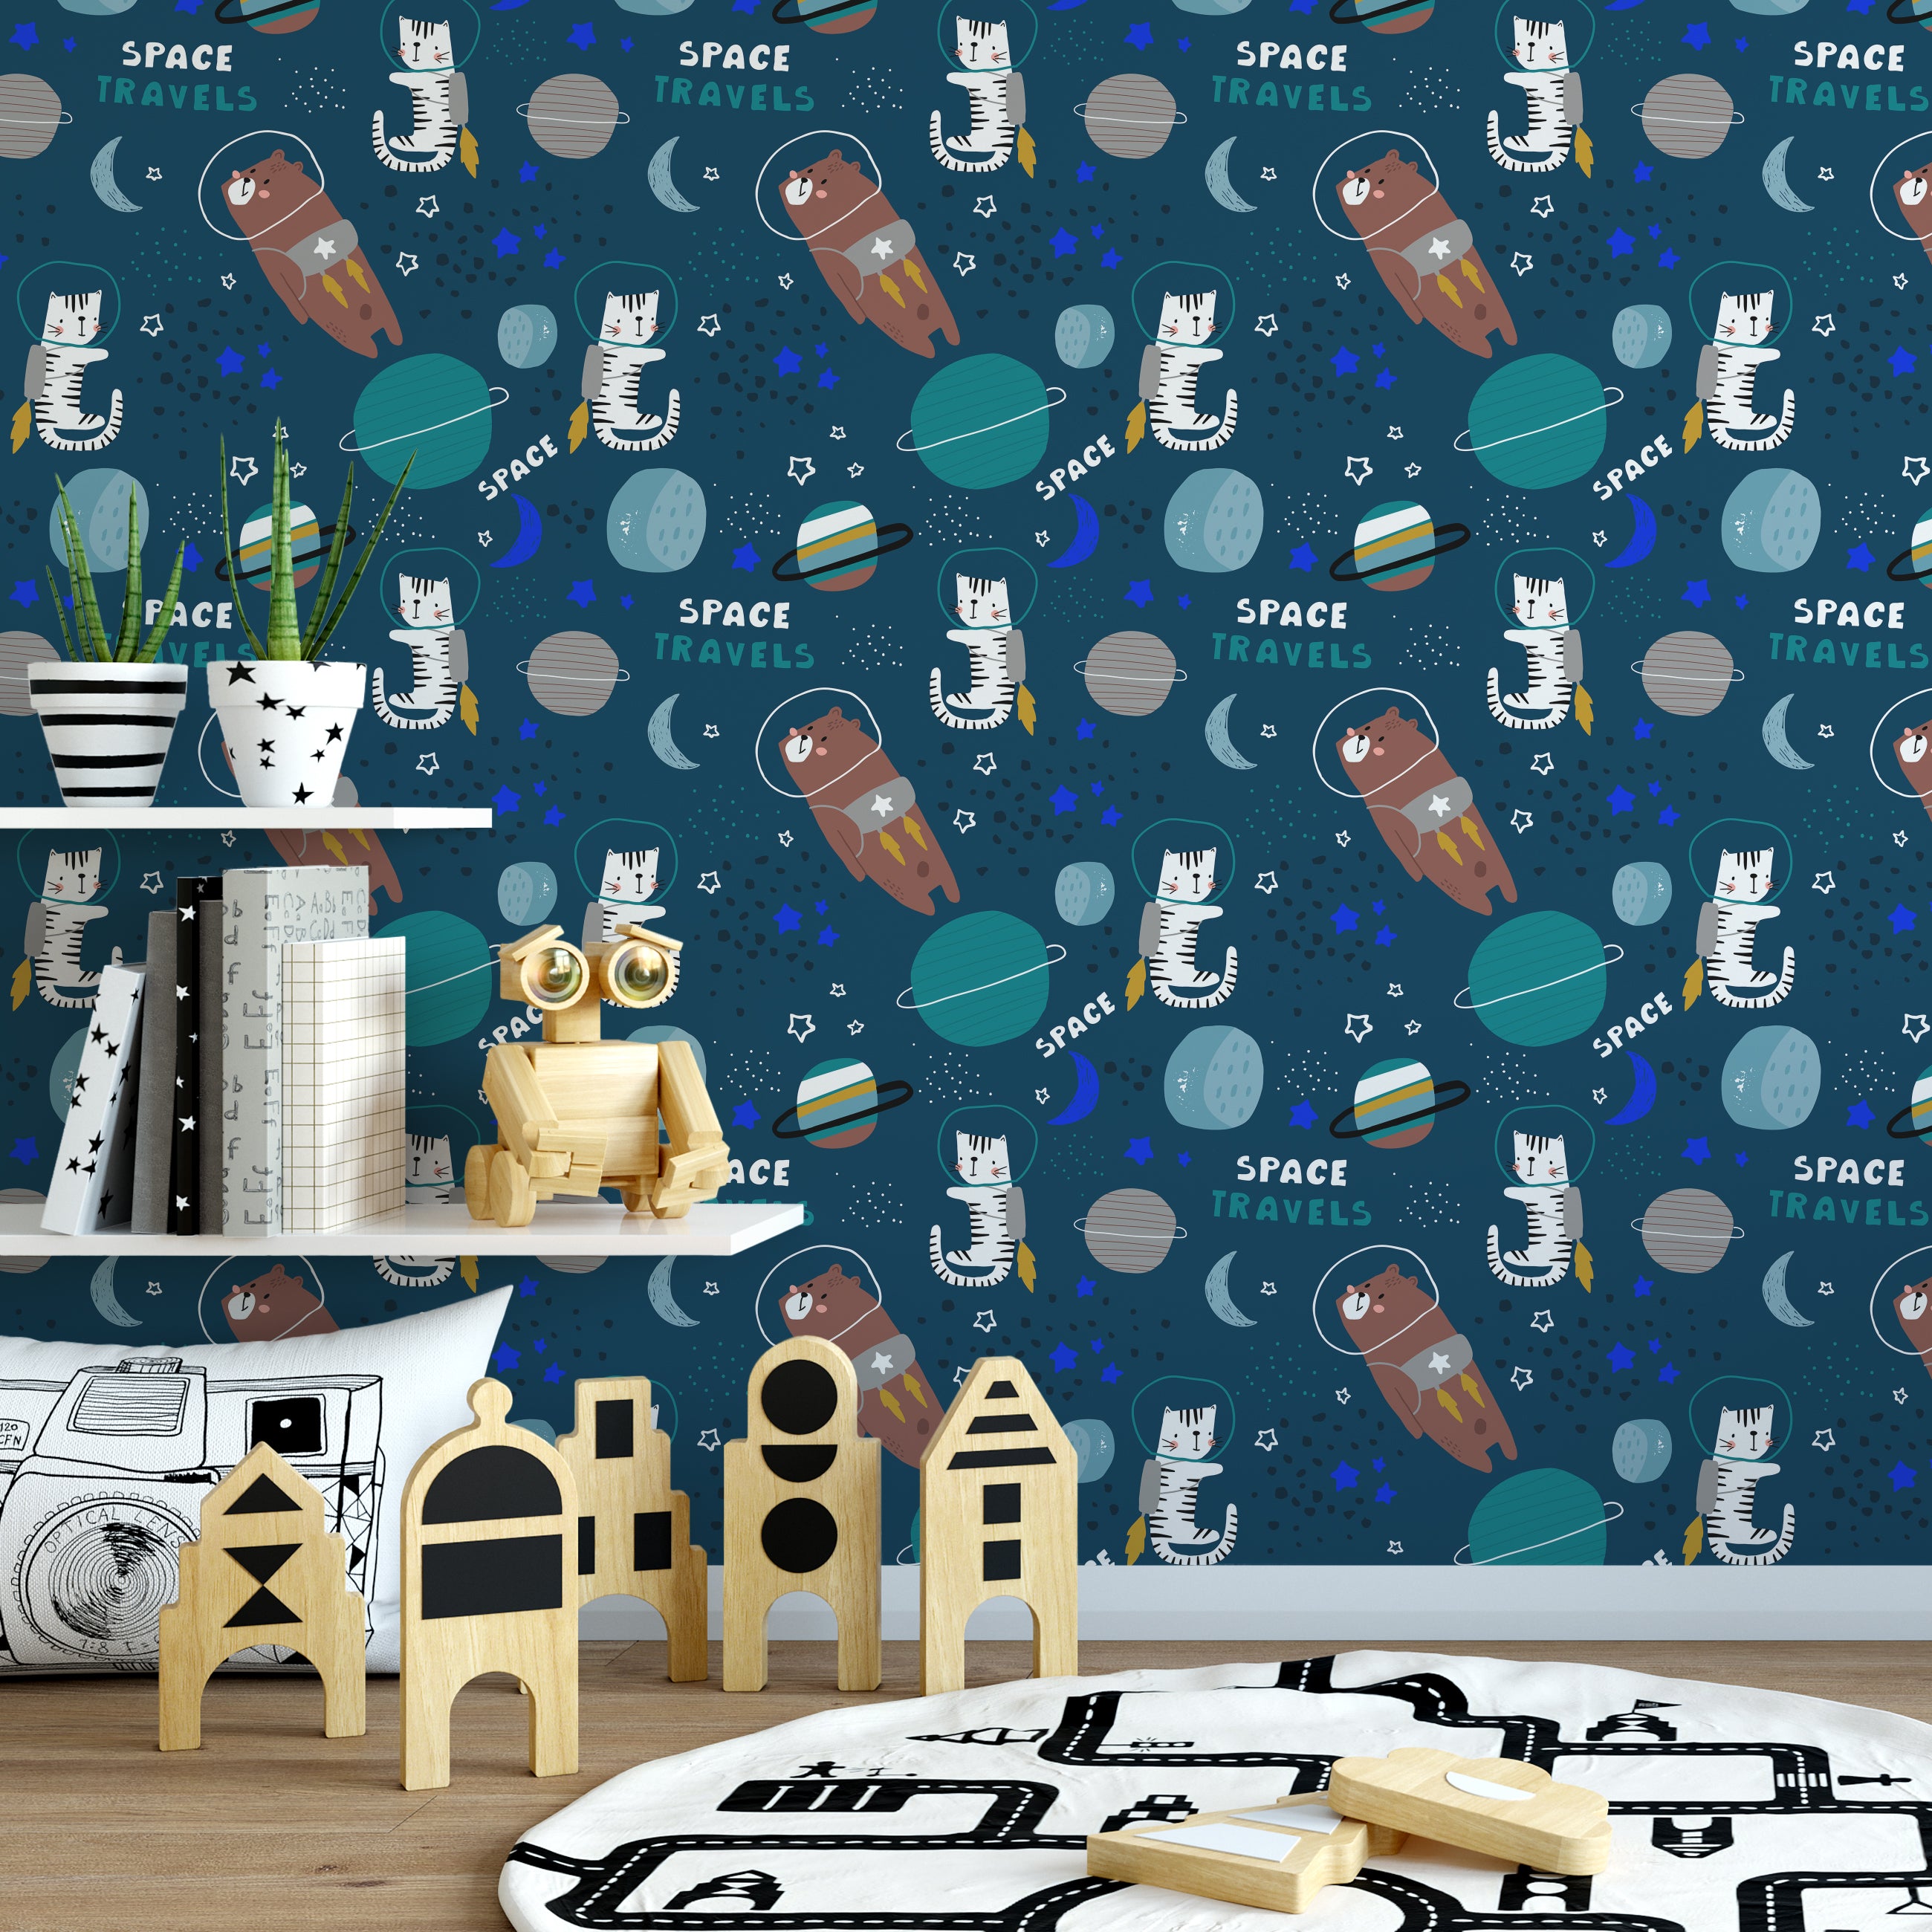 A vibrant children's room featuring a wall covered in a space-themed wallpaper with illustrations of bears and tigers wearing space helmets and jetpacks. The room is decorated with toys and shelves, creating a fun and imaginative atmosphere.